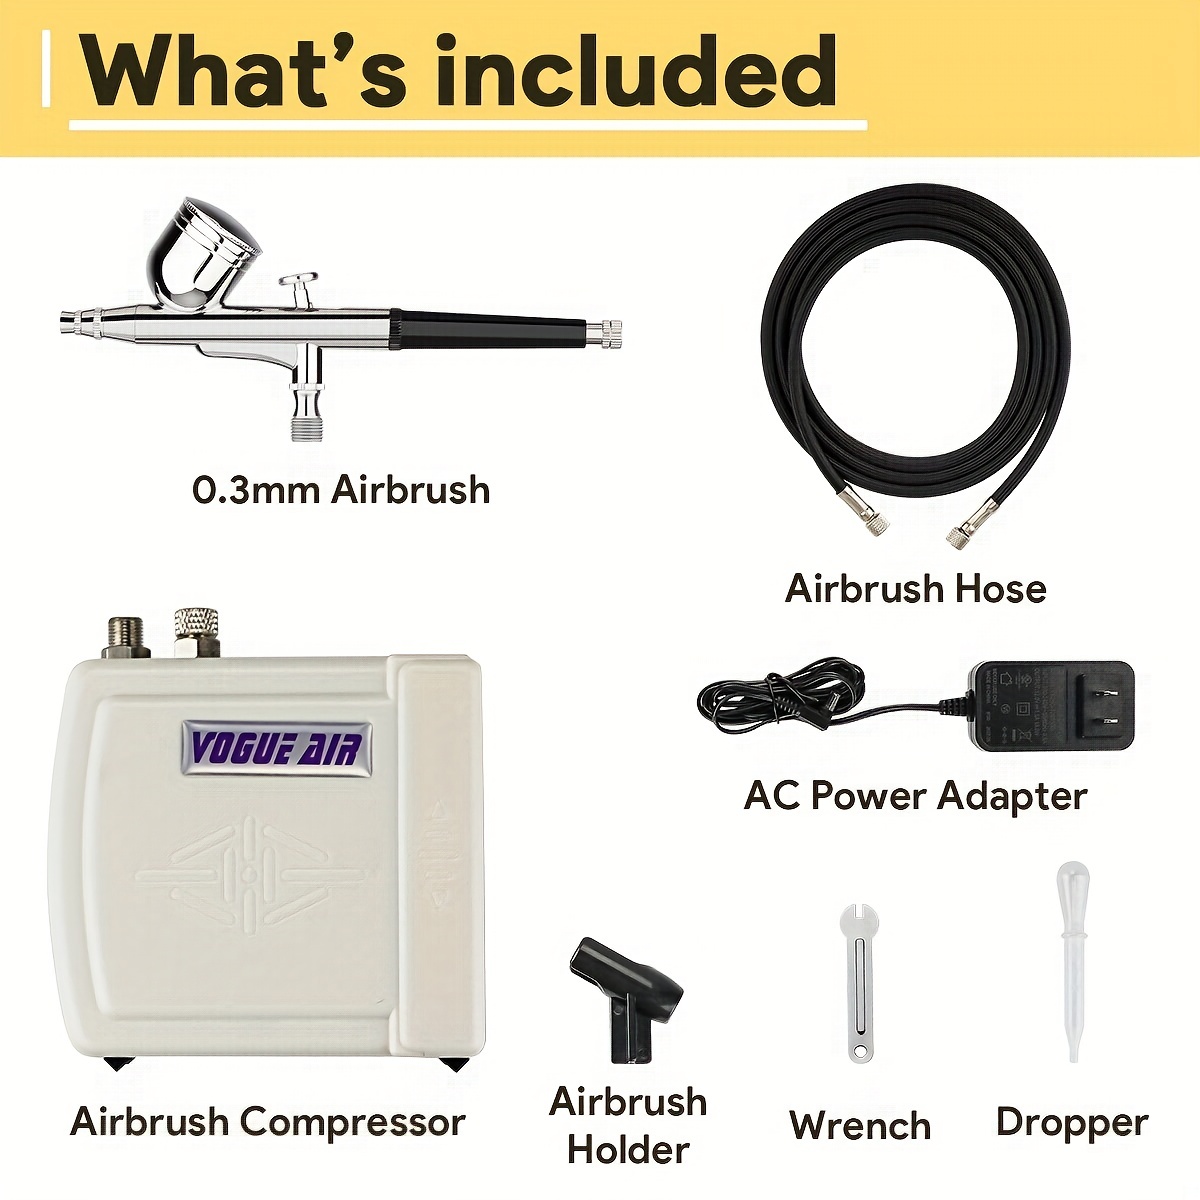 Multi-Purpose Gold Airbrushing System Kit with Portable Mini Air Compressor  - Gravity Feed Dual-Action Airbrush, Hose, How-To-Airbrush Link Card